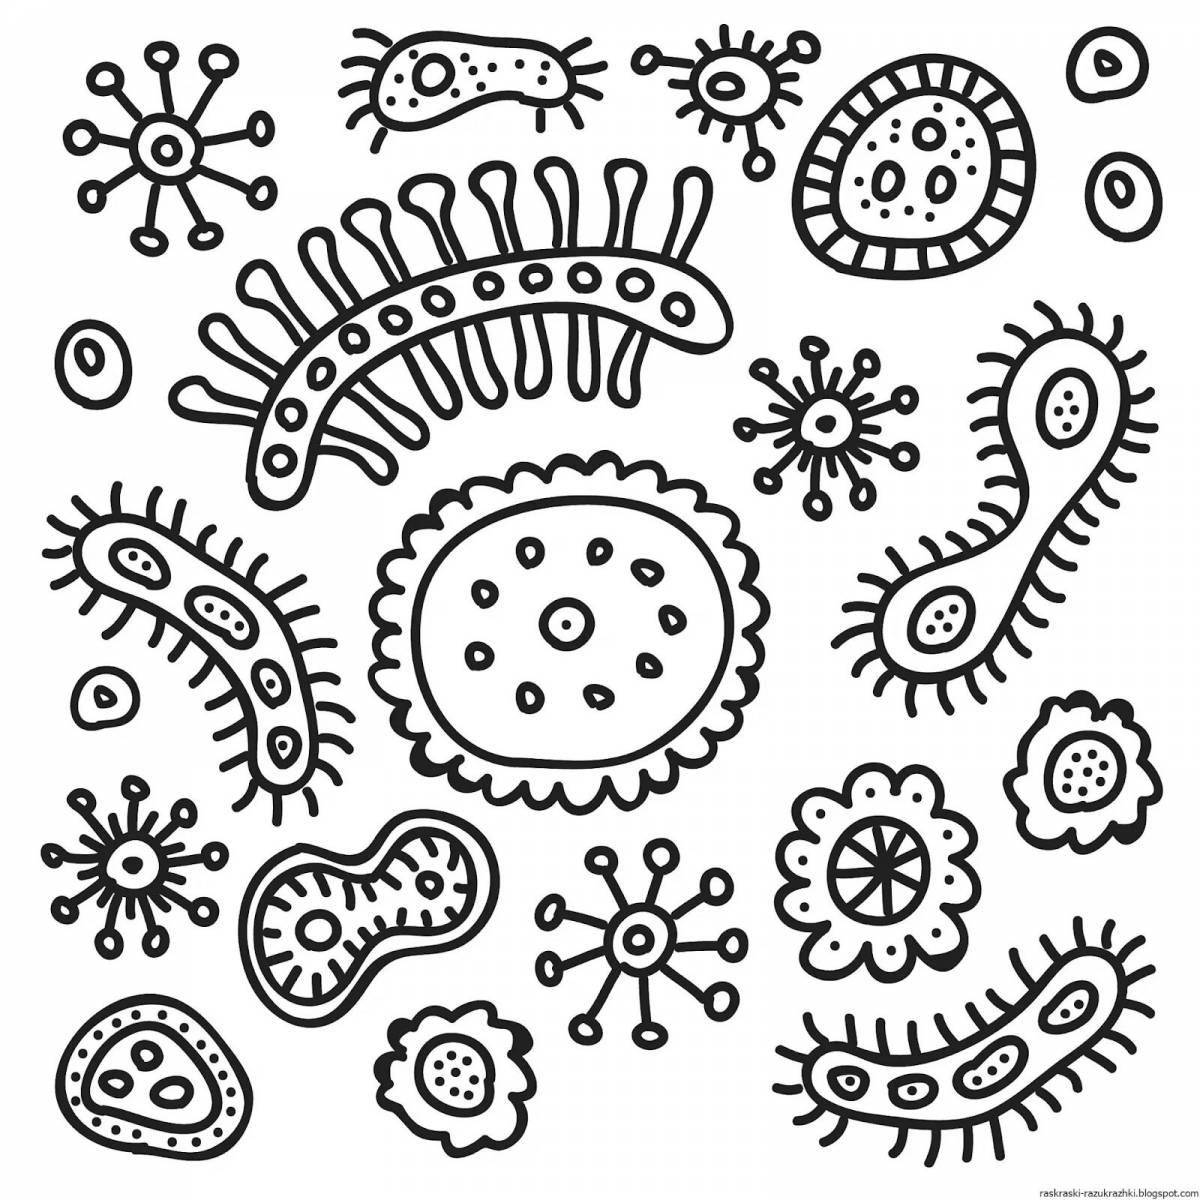 Comic bacteria coloring page